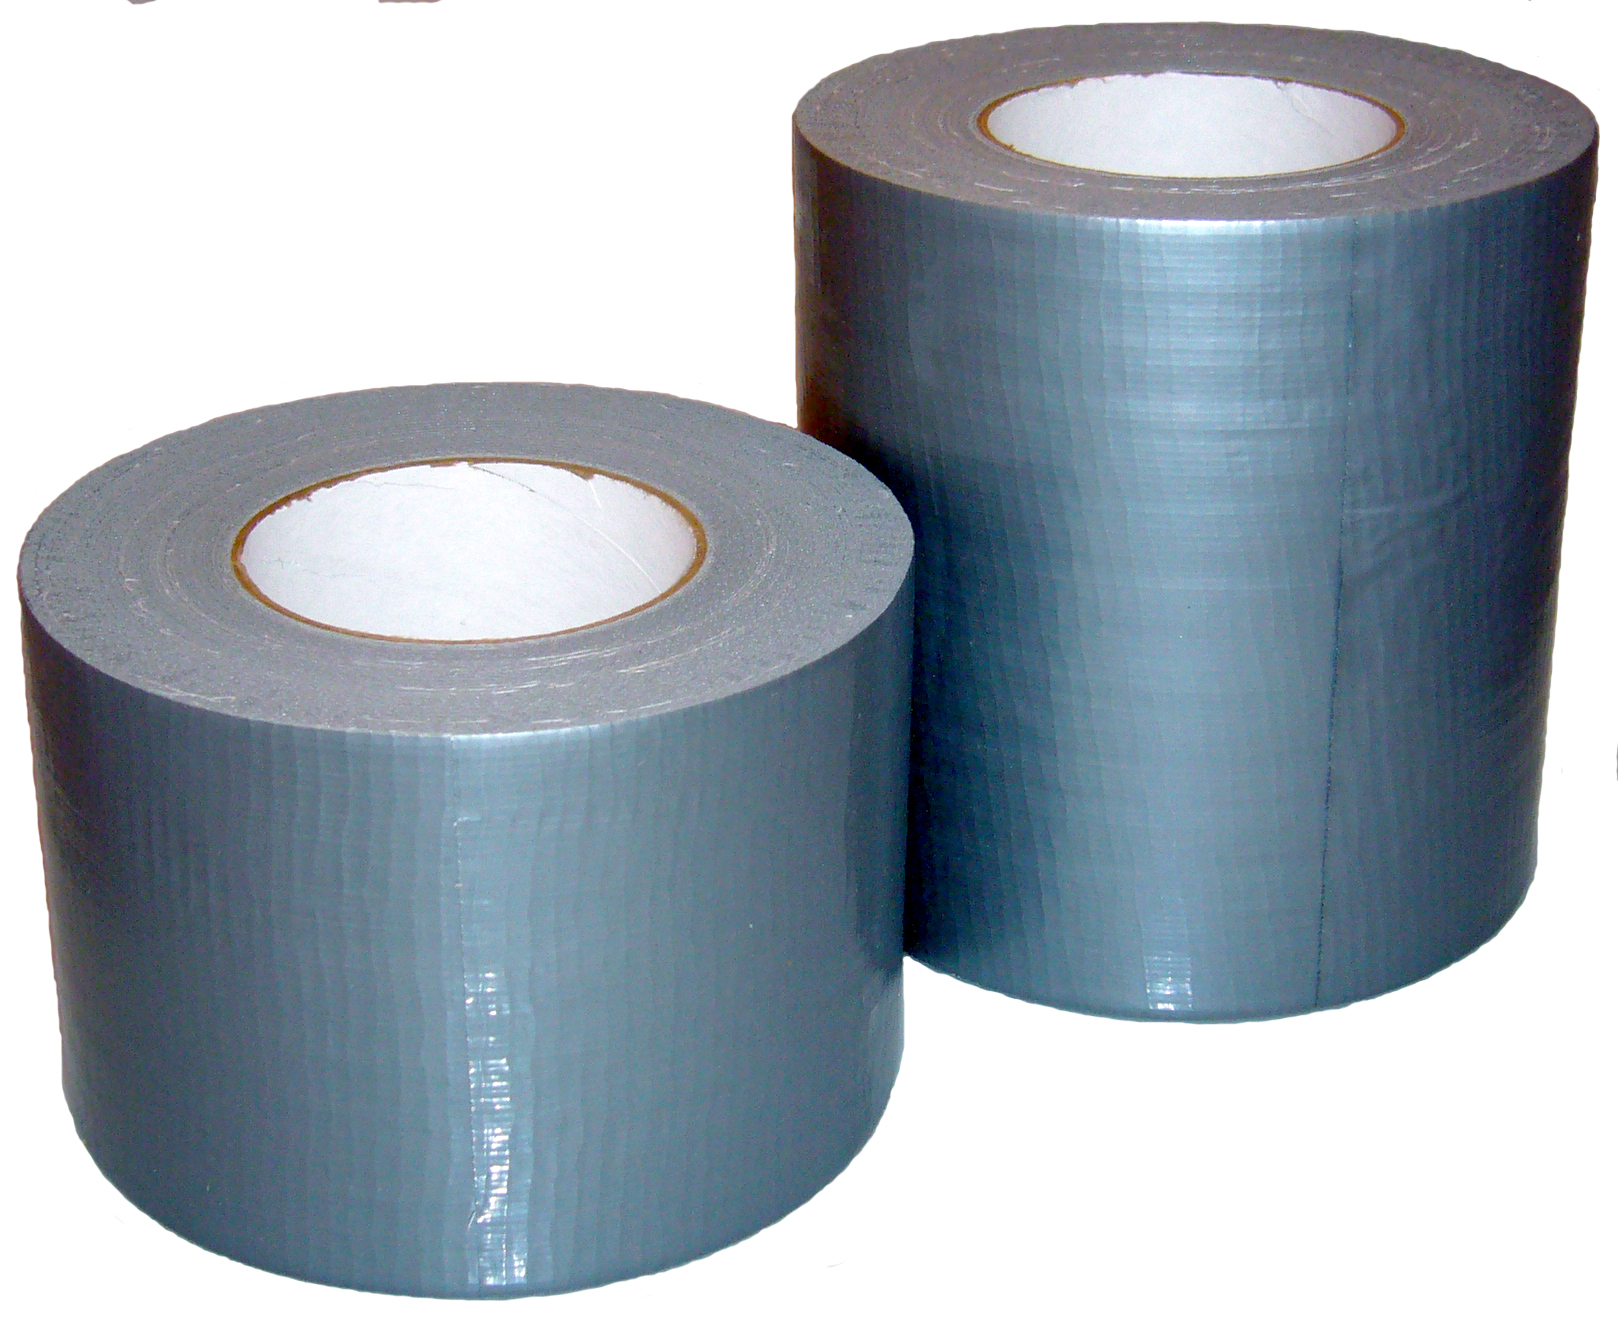 2&quot; X 60 YDS GREY DUCT TAPE
GP2280 POLYNASH 9 MIL